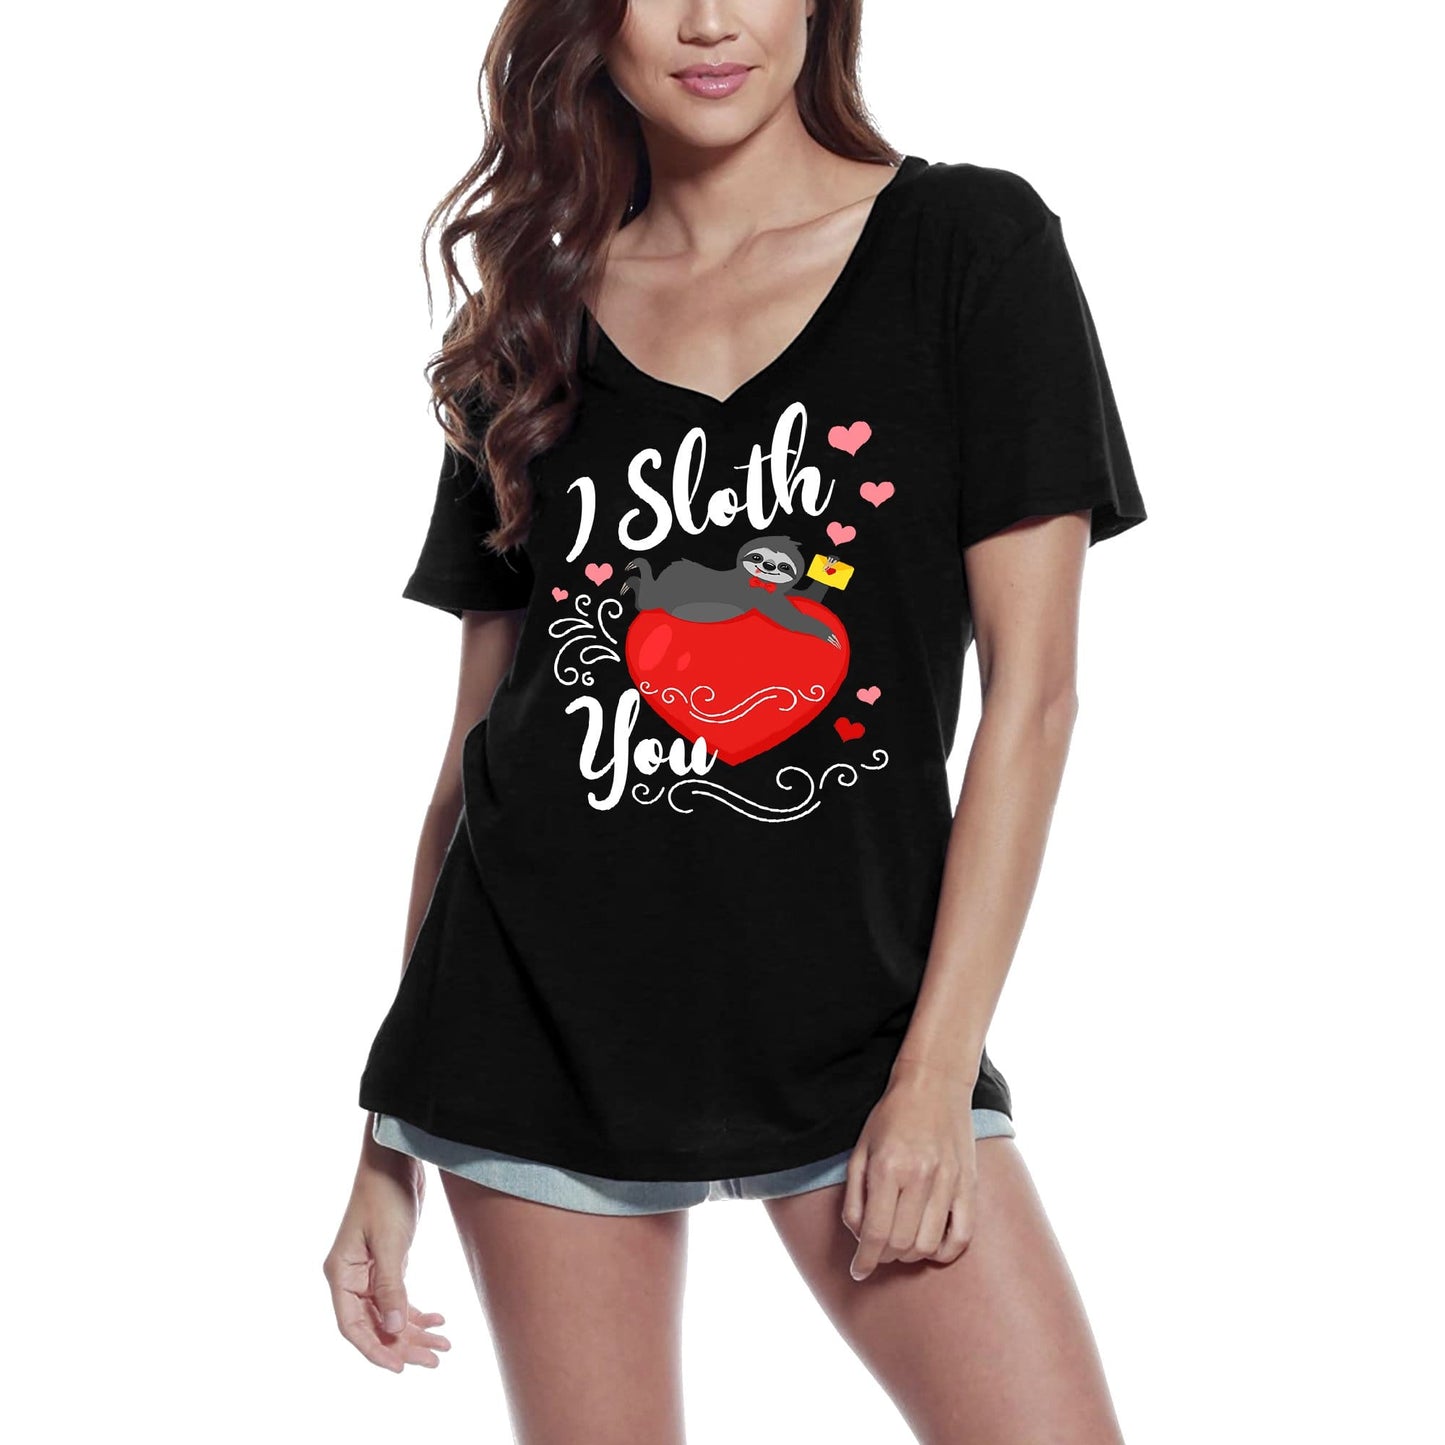 ULTRABASIC Women's T-Shirt I Sloth You - Love Valentine's Day Short Sleeve Graphic Tees Tops